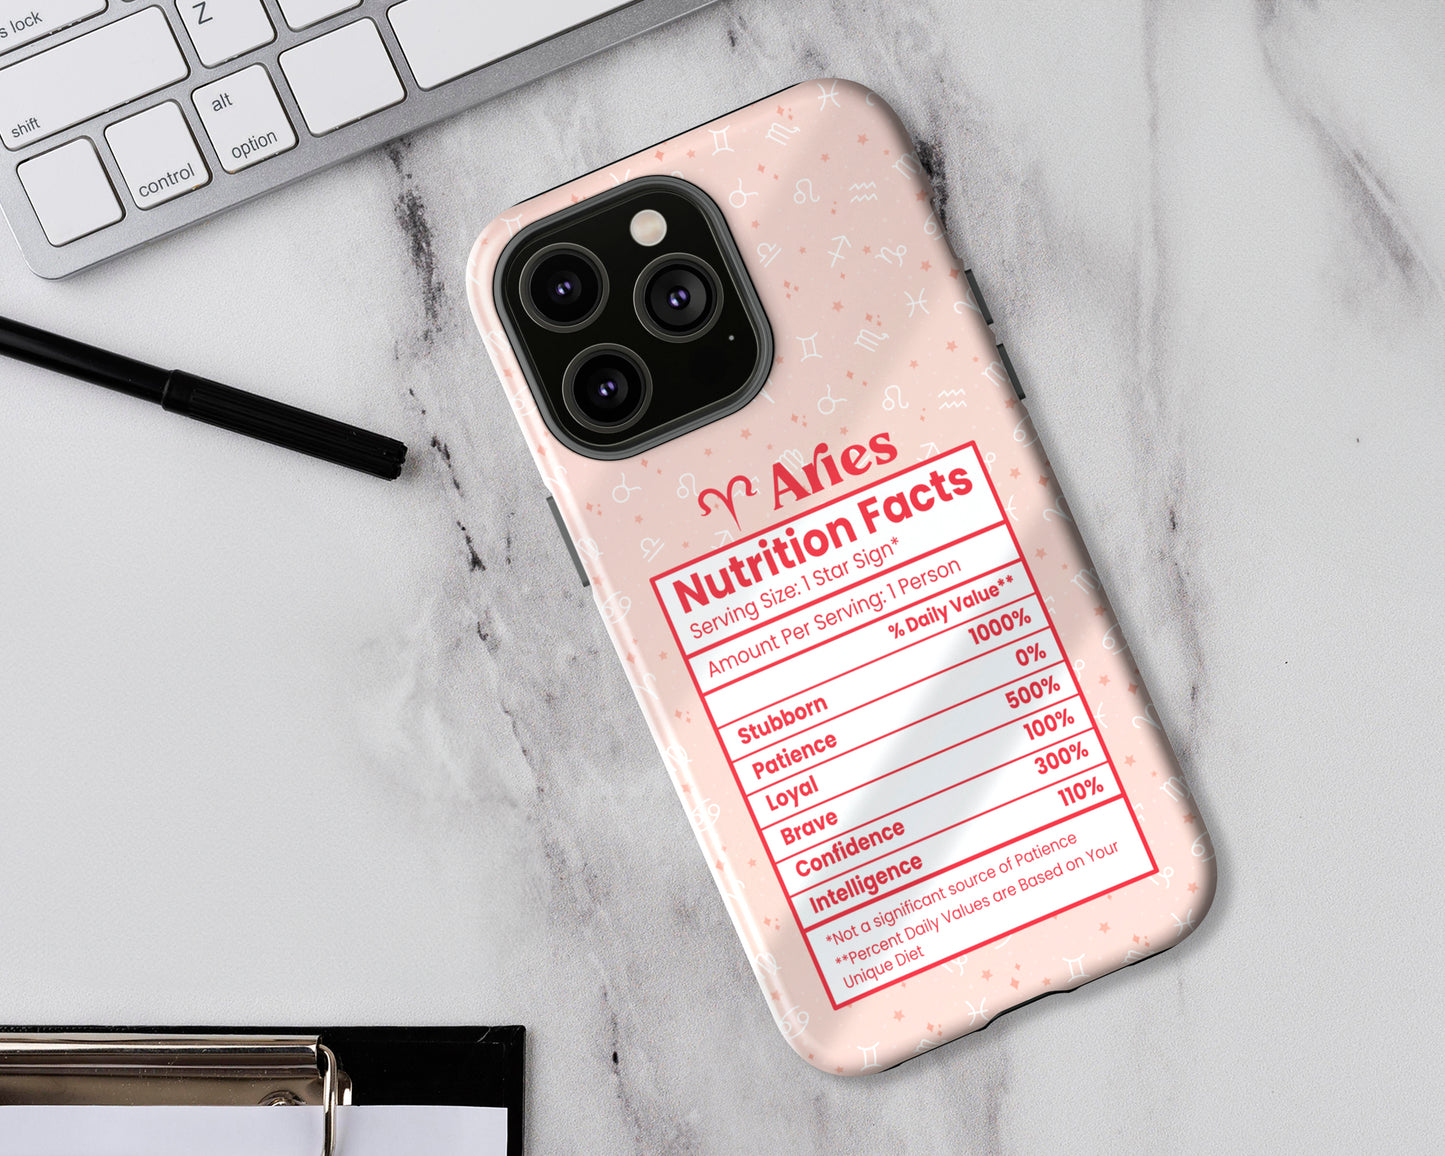 Aries Zodiac sign nutrition facts label iPhone case